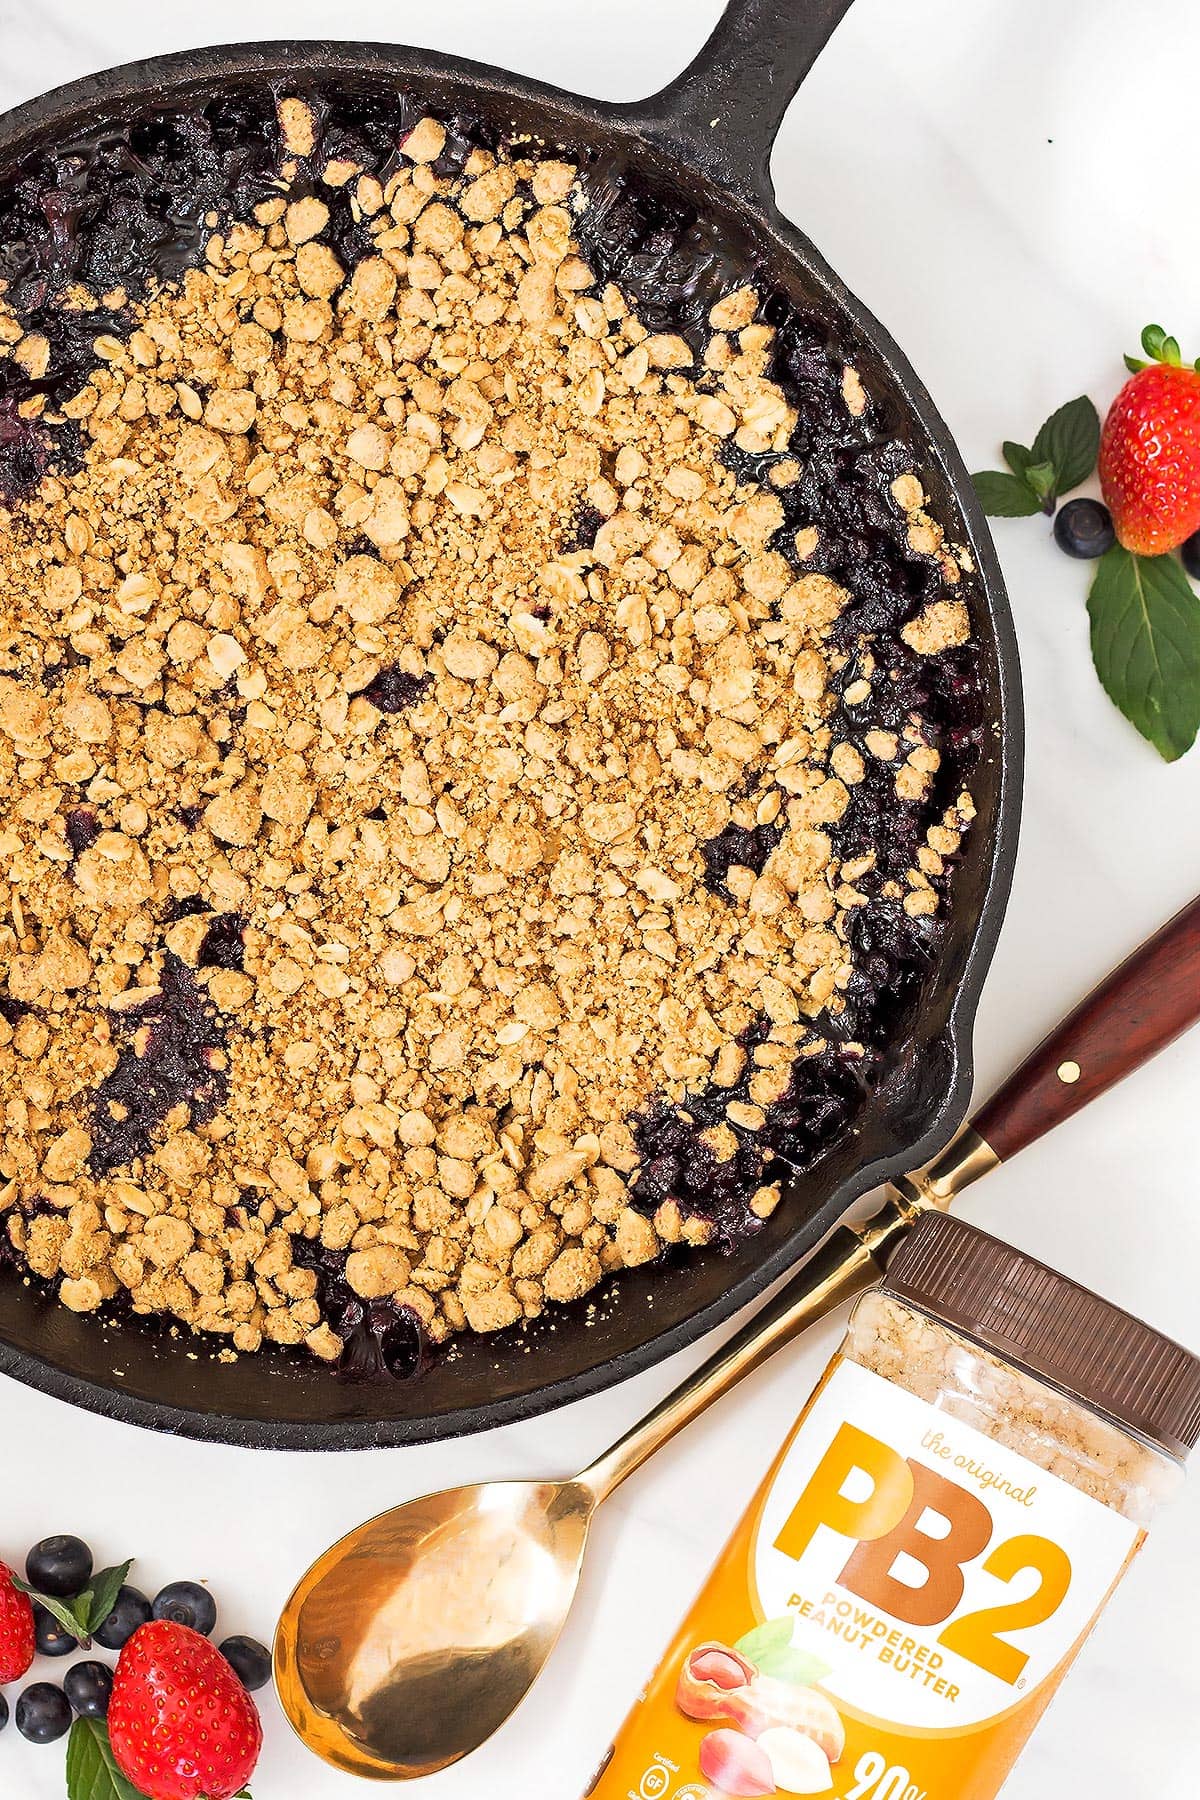 Baked Berry Crumble in Cast Iron Pan